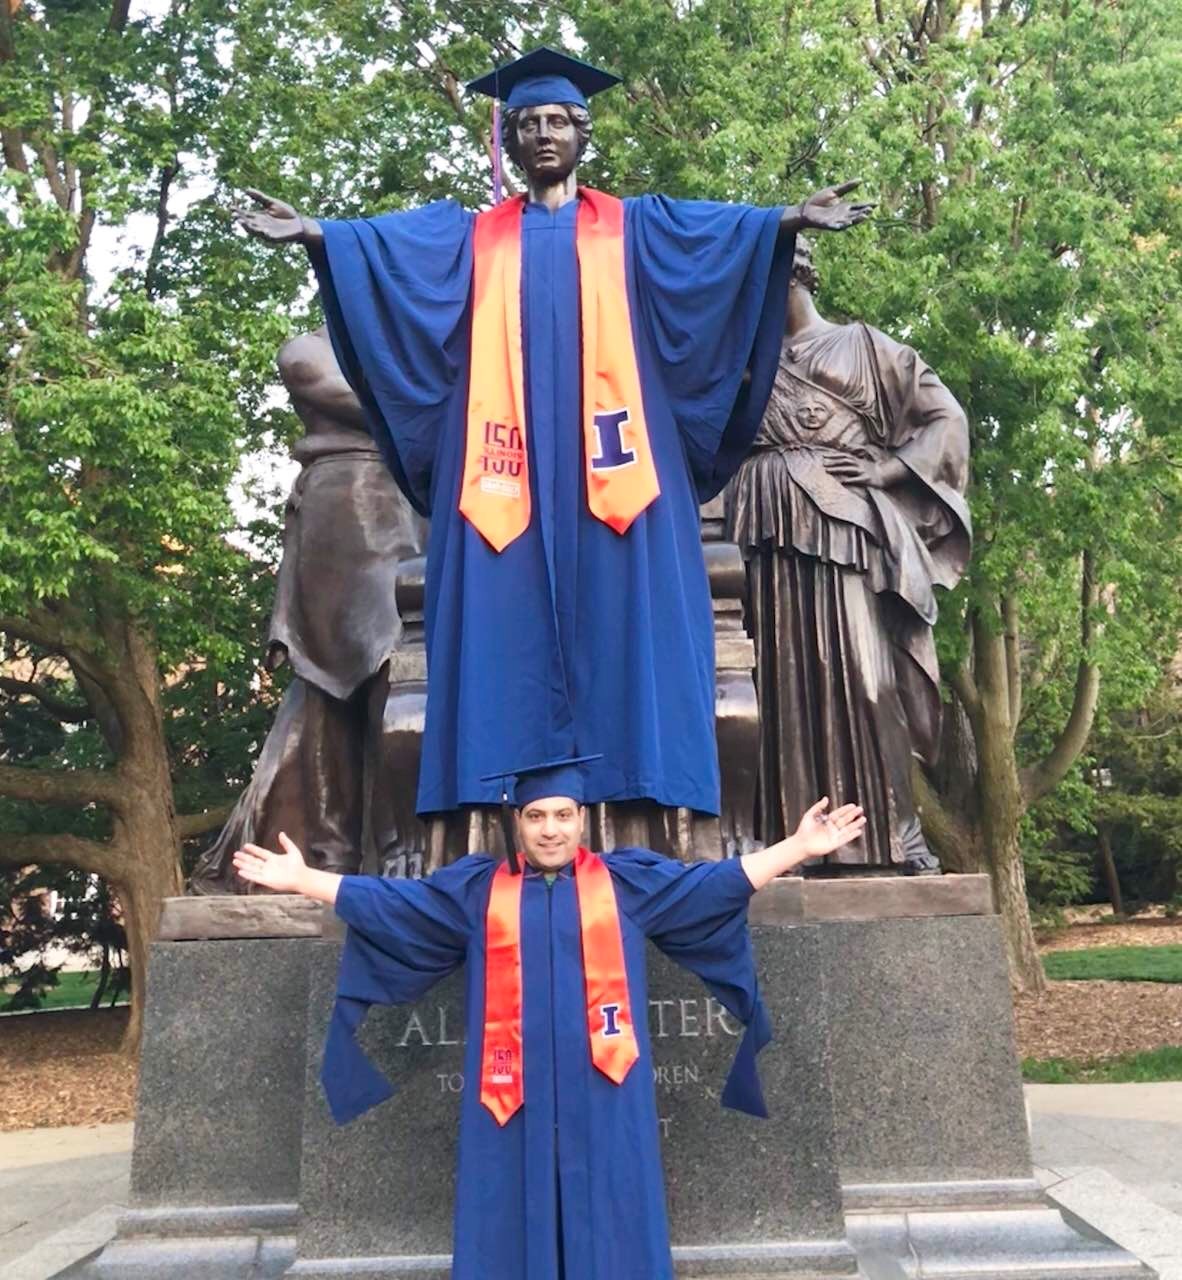 Man in graduation robe and cap poses next to statue